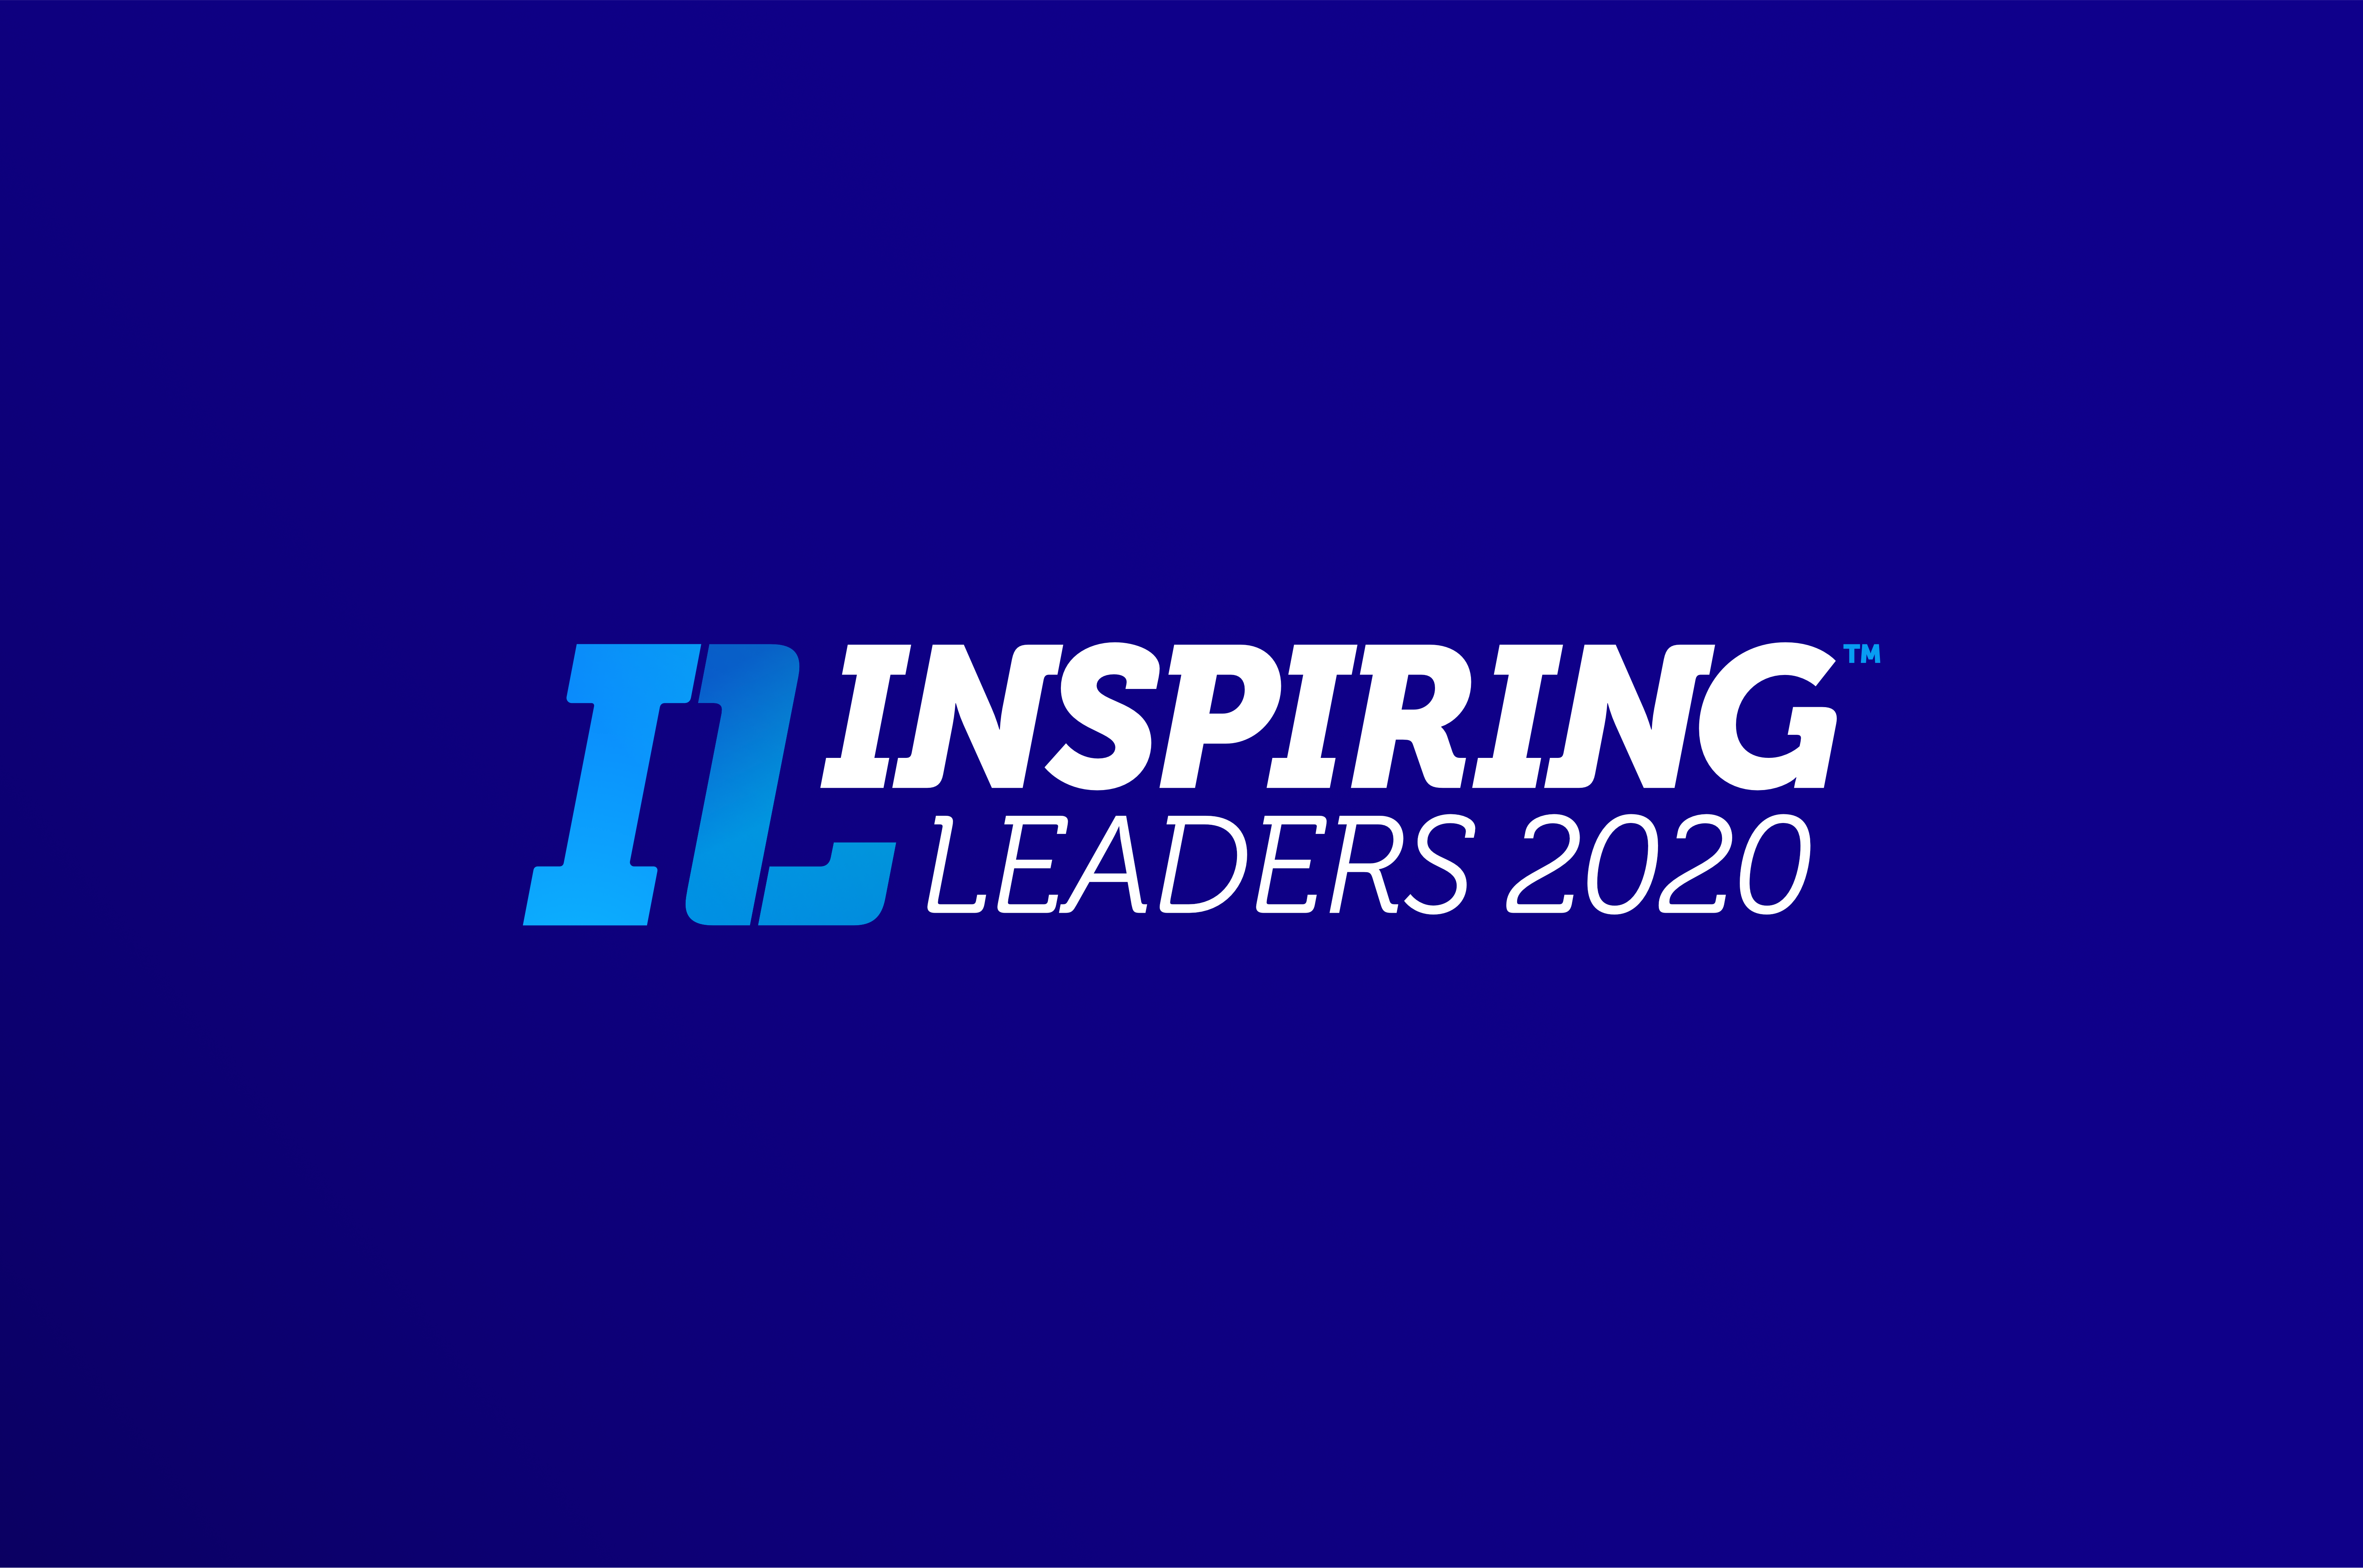 The Inspiring Leaders Awards open to recognize the best leaders during the COVID-19 pandemic and the socio-political issues of 2020